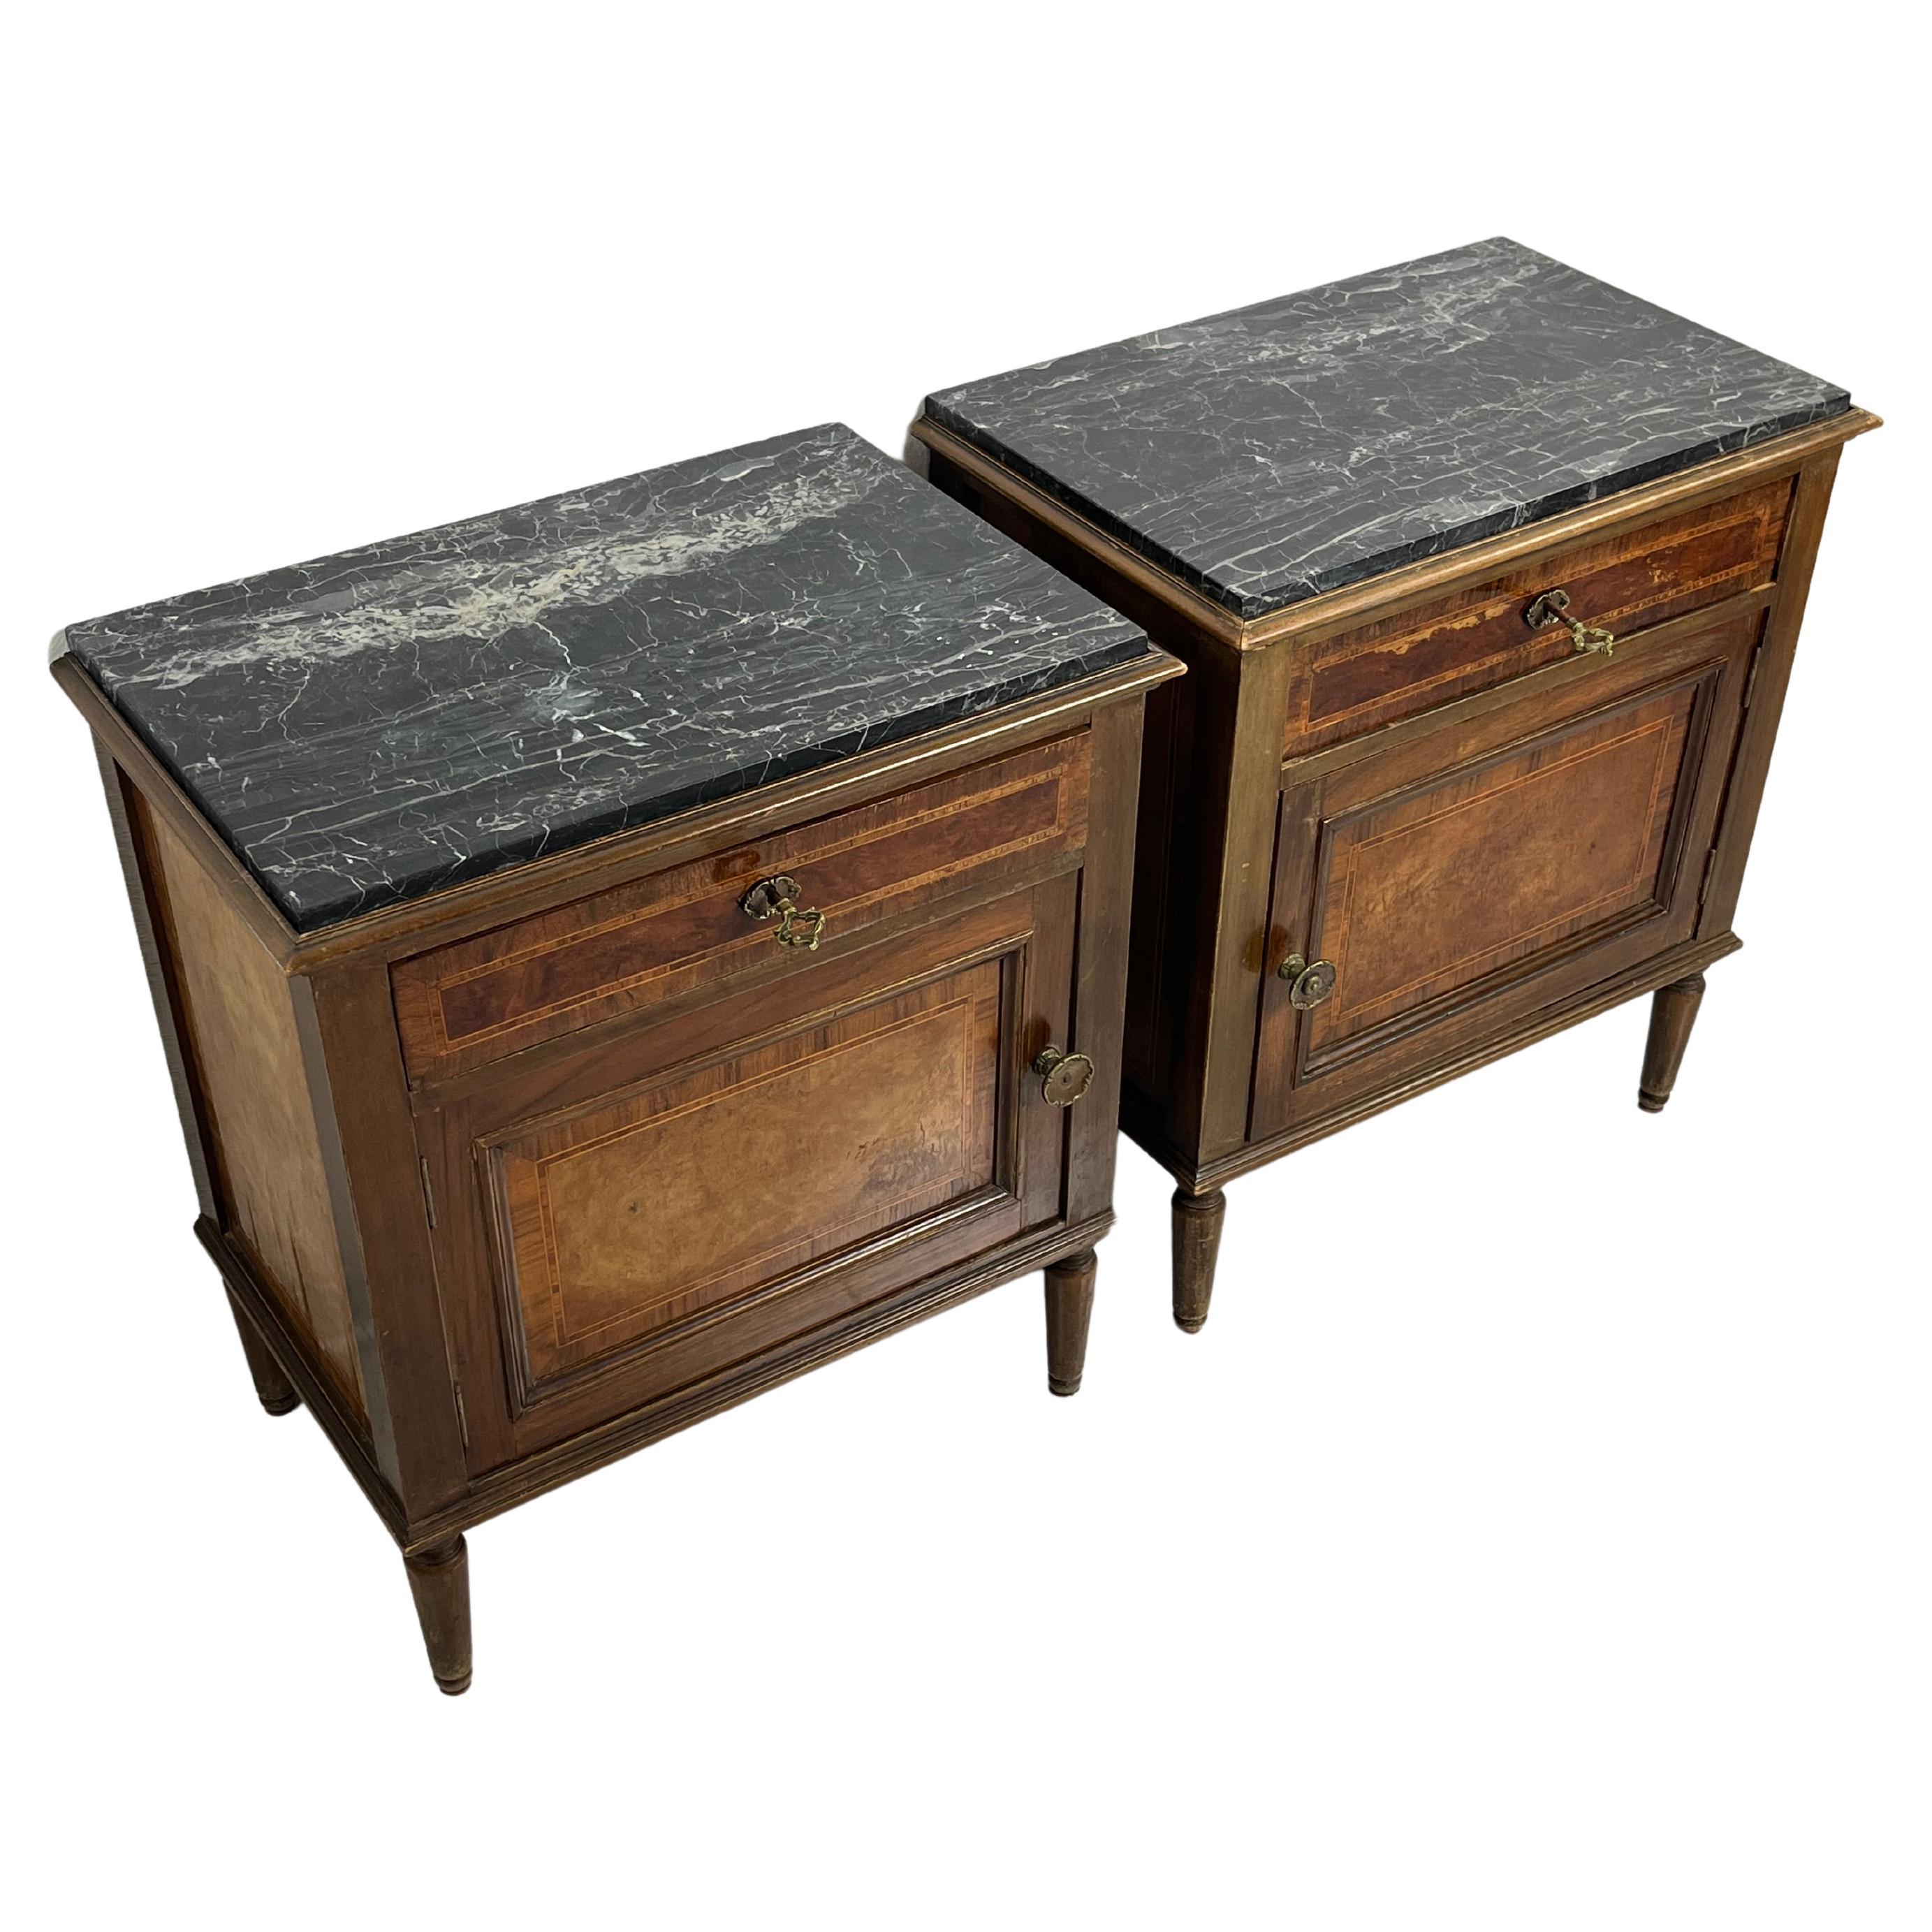 Set of 2 Mid-Century Italian Bedside Tables in Wood and Fine Marble Top 1960s For Sale